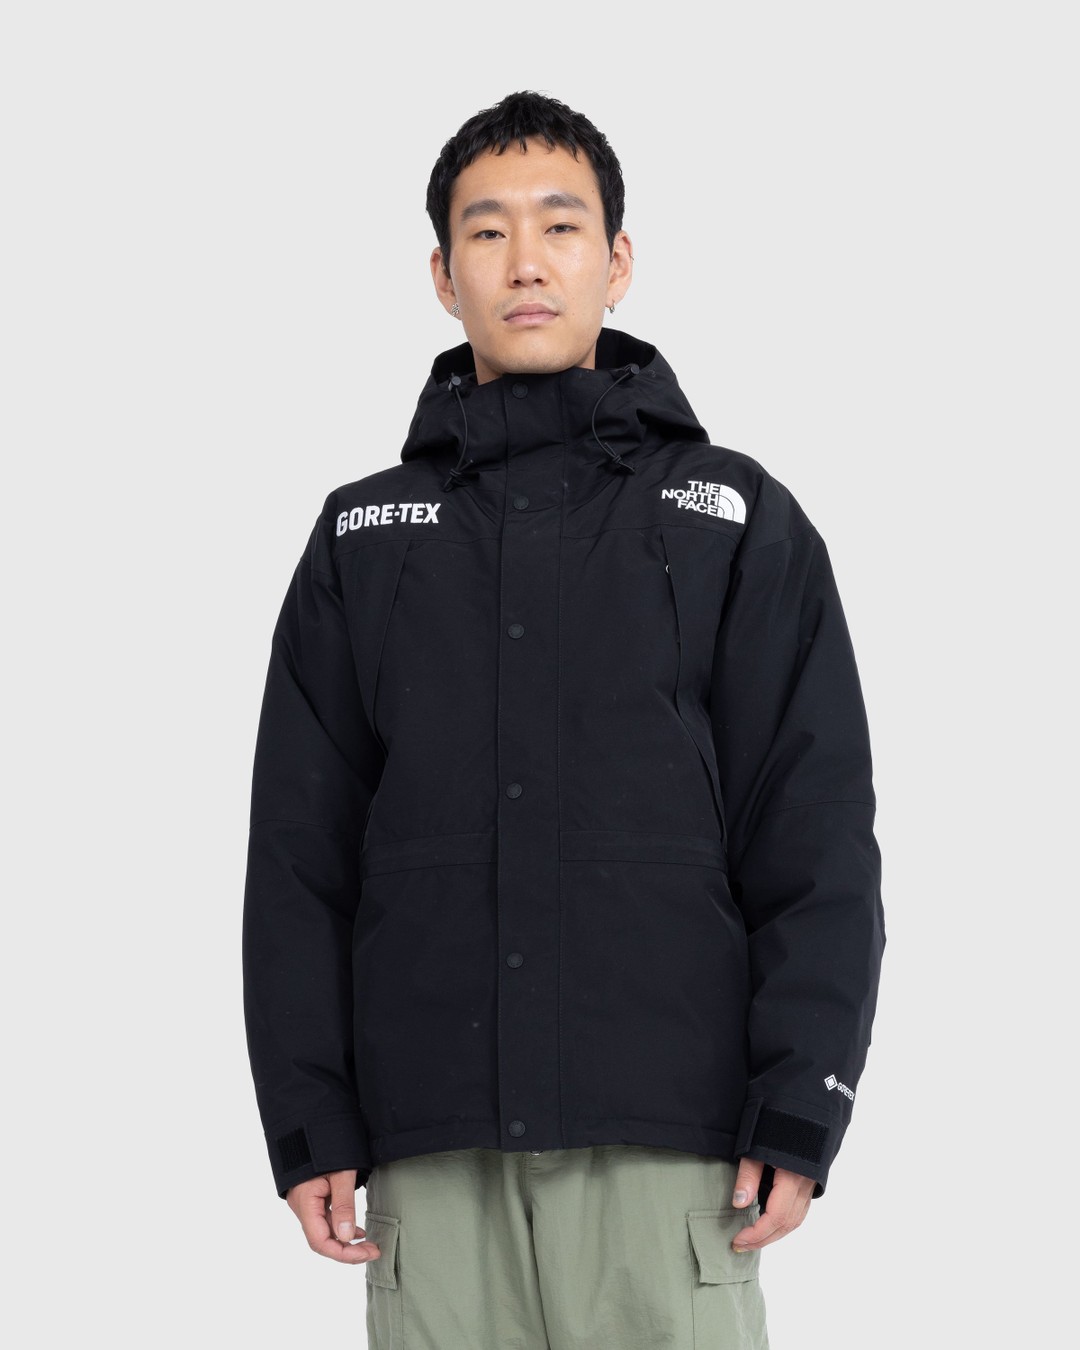 The North Face – GORE-TEX Mountain Guide Insulated Jacket Black - Outerwear - Black - Image 2